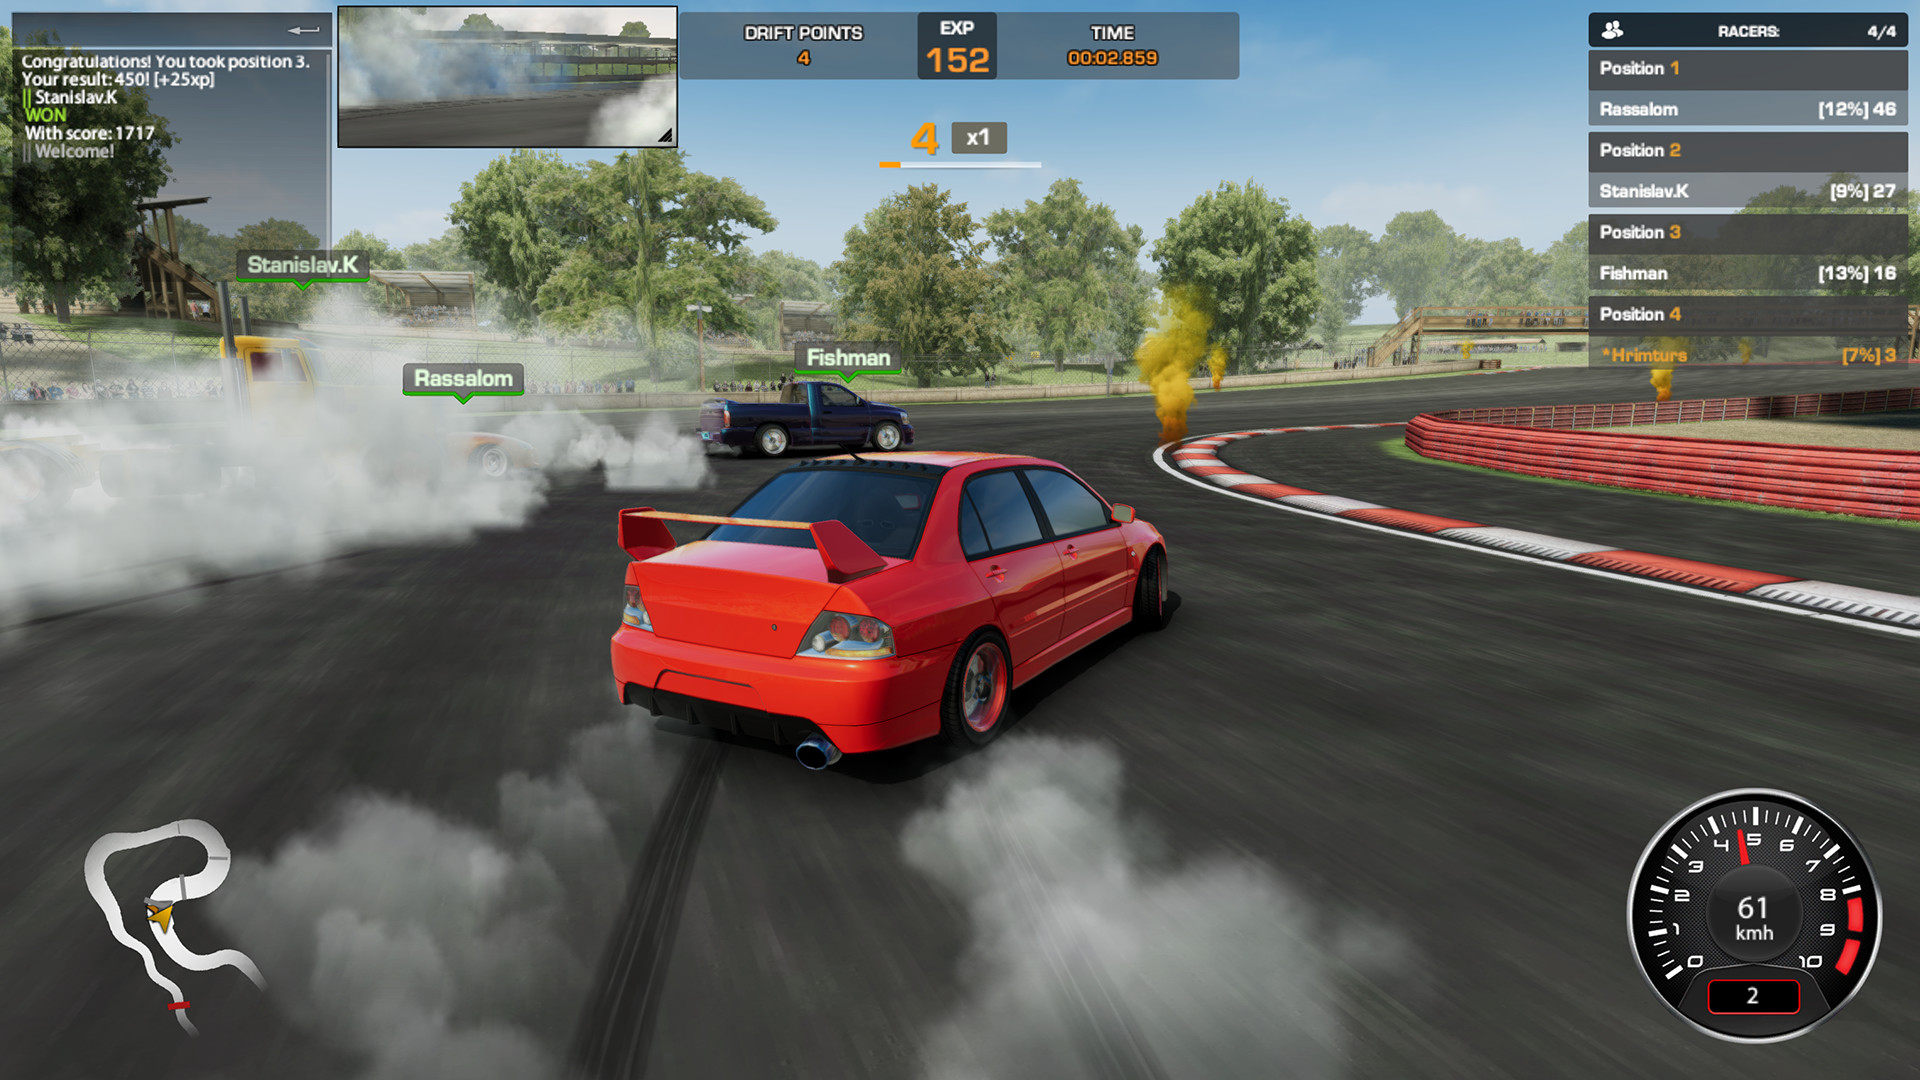 Is CarX Drift Racing Online Any Good? 